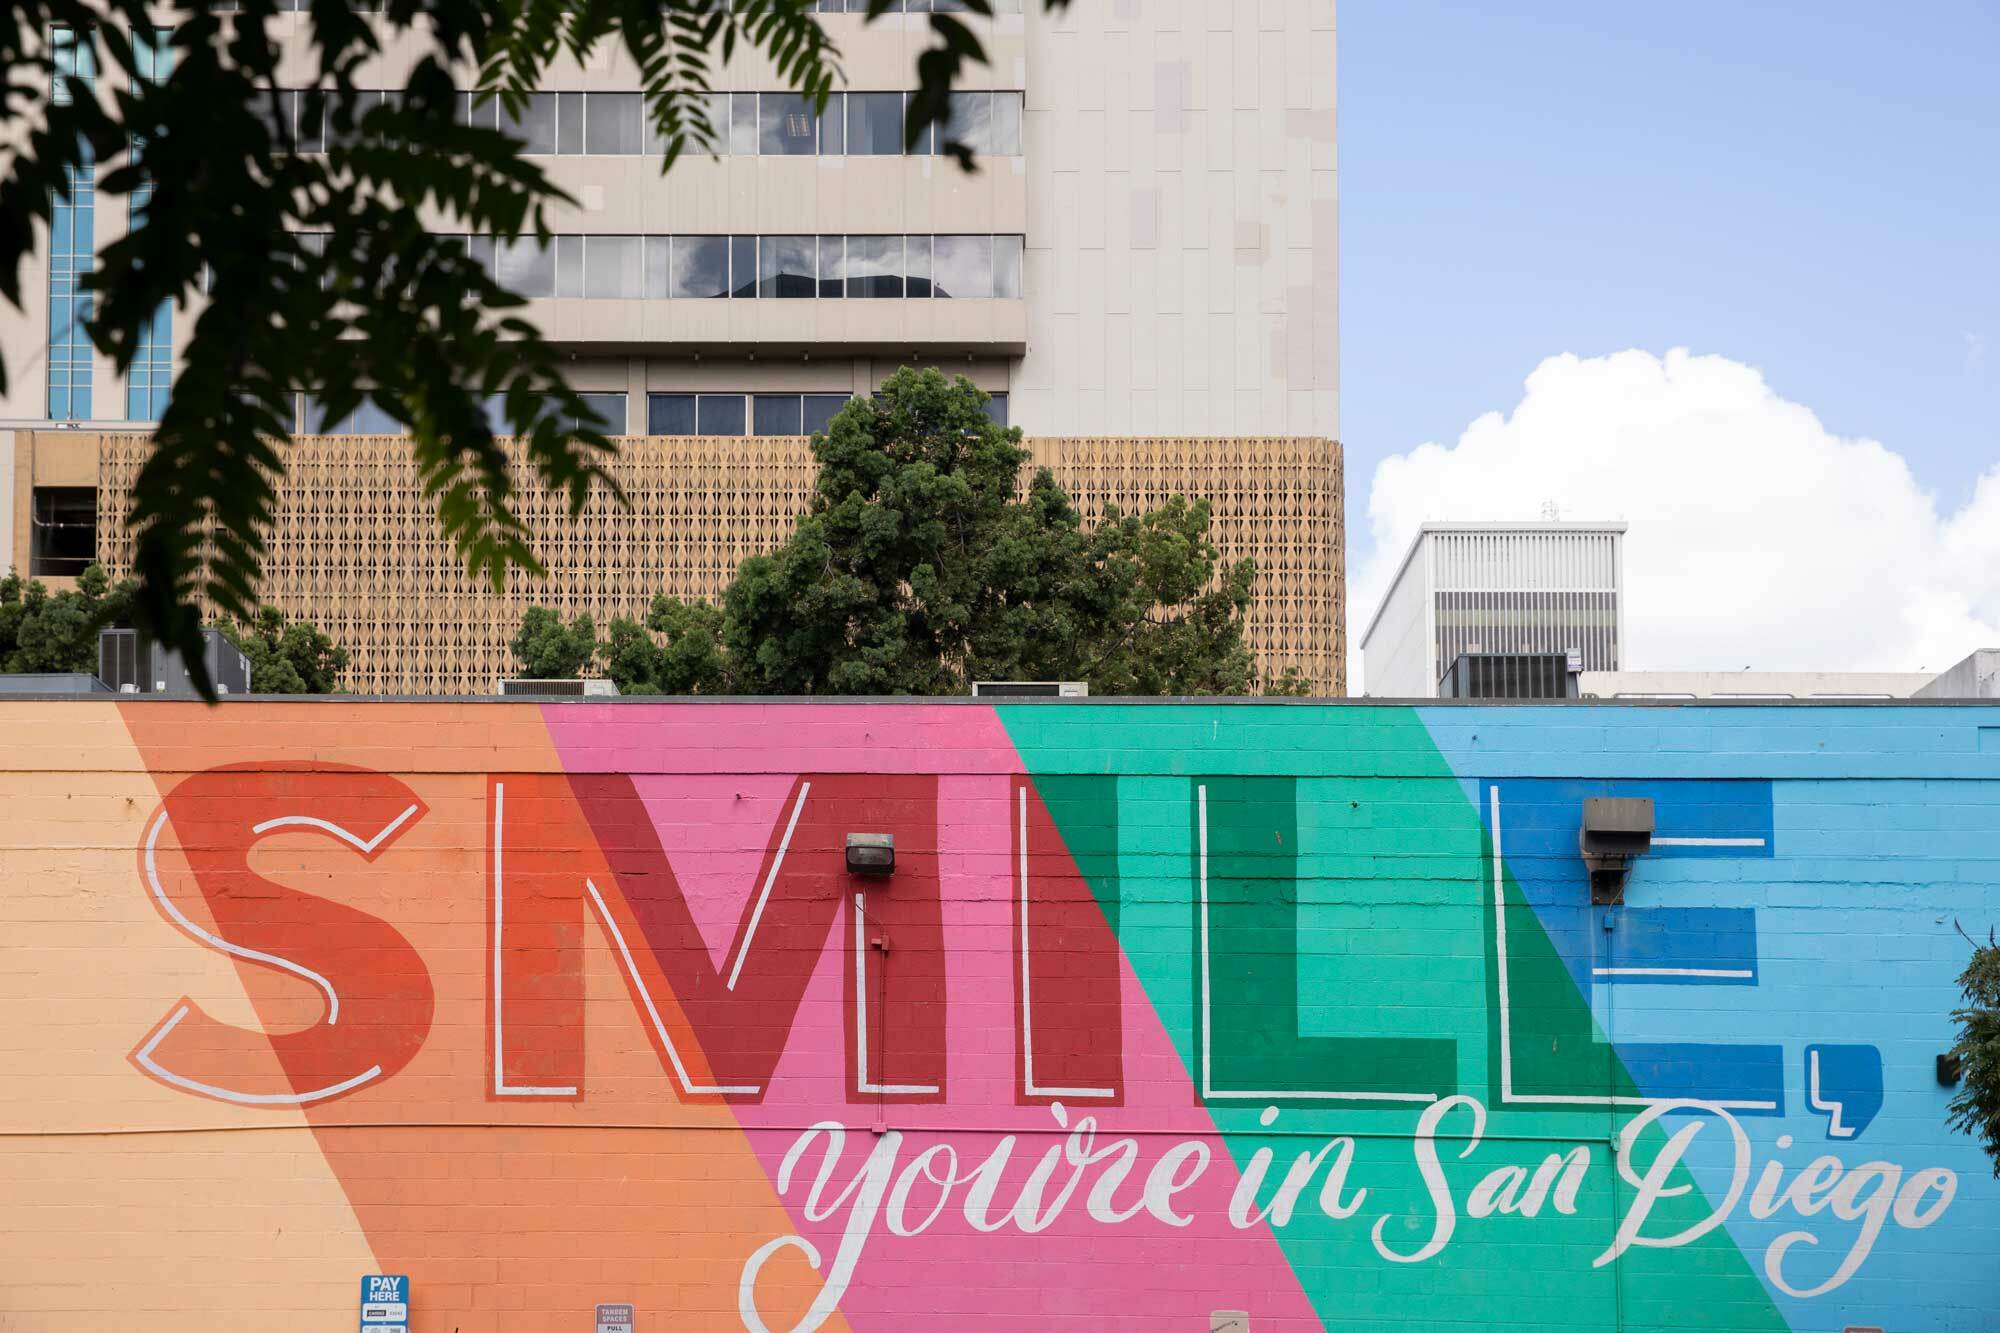 large outdoor mural reading "smile you're in San Diego"